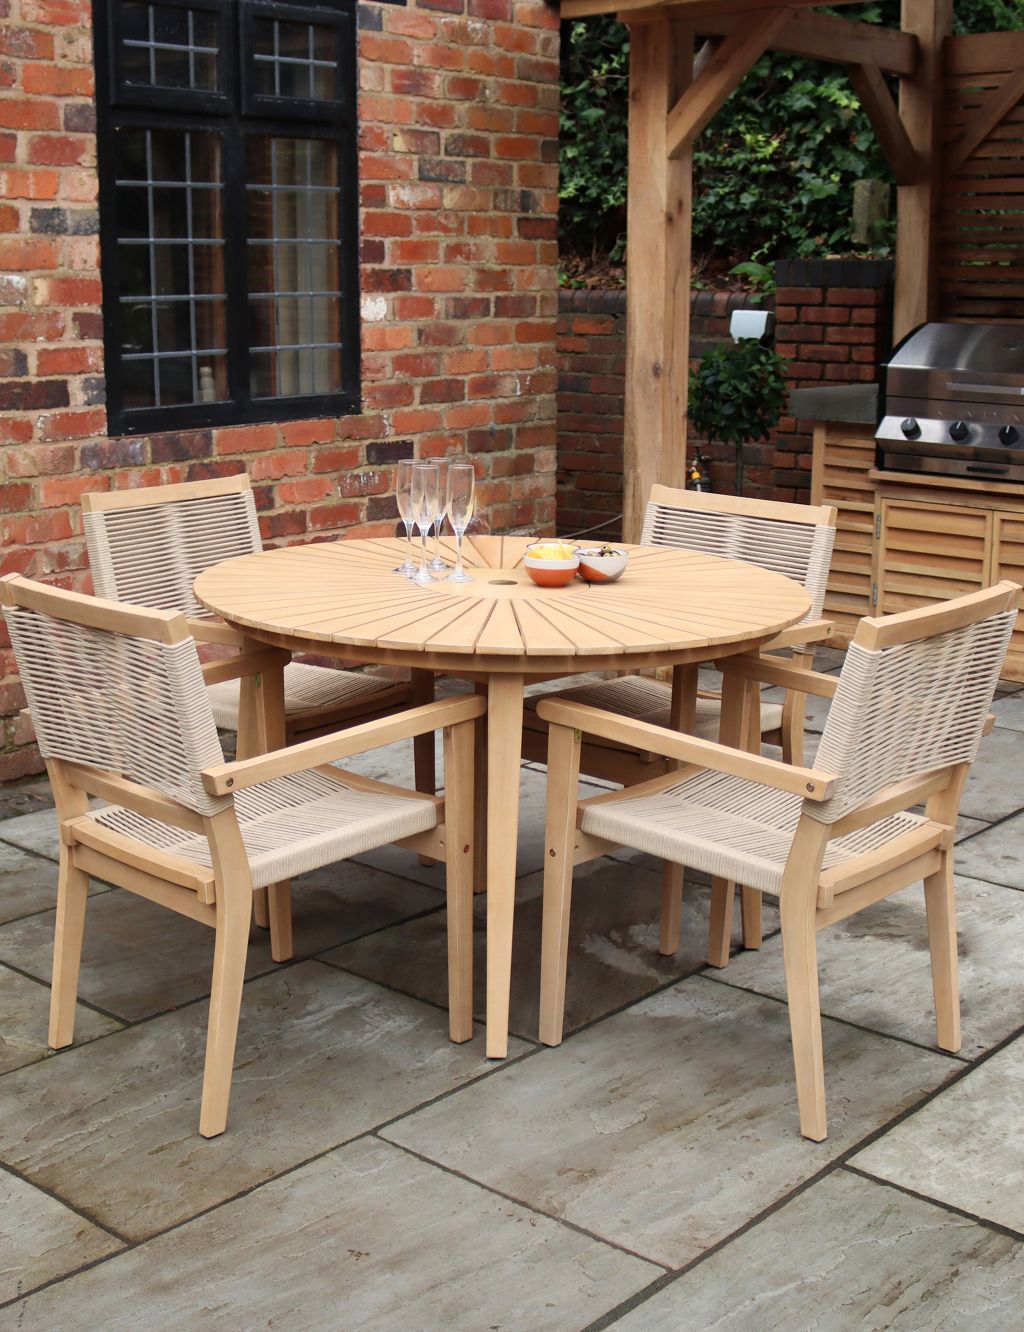 Roma 4 Seater Garden Table & Chairs 1 of 3